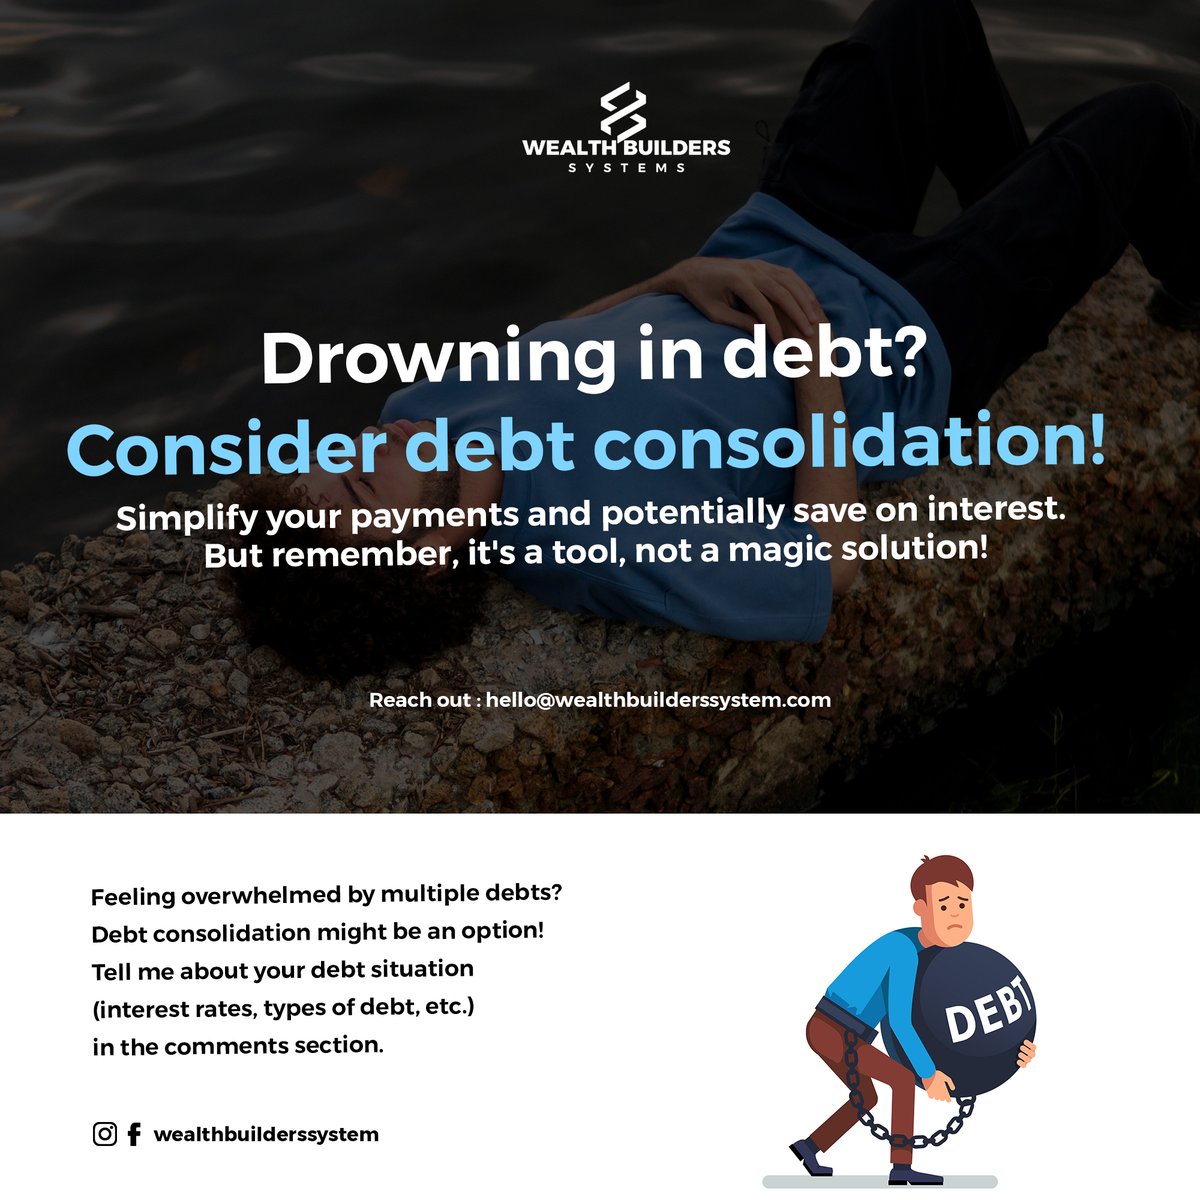 Struggling with multiple debts?  Debt consolidation could simplify your payments & potentially save on interest! But remember, it's not a magic bullet  Read the key factors to consider before consolidating your debt. #WealthBuilderSystem #debtfreecommunity #financialguidance